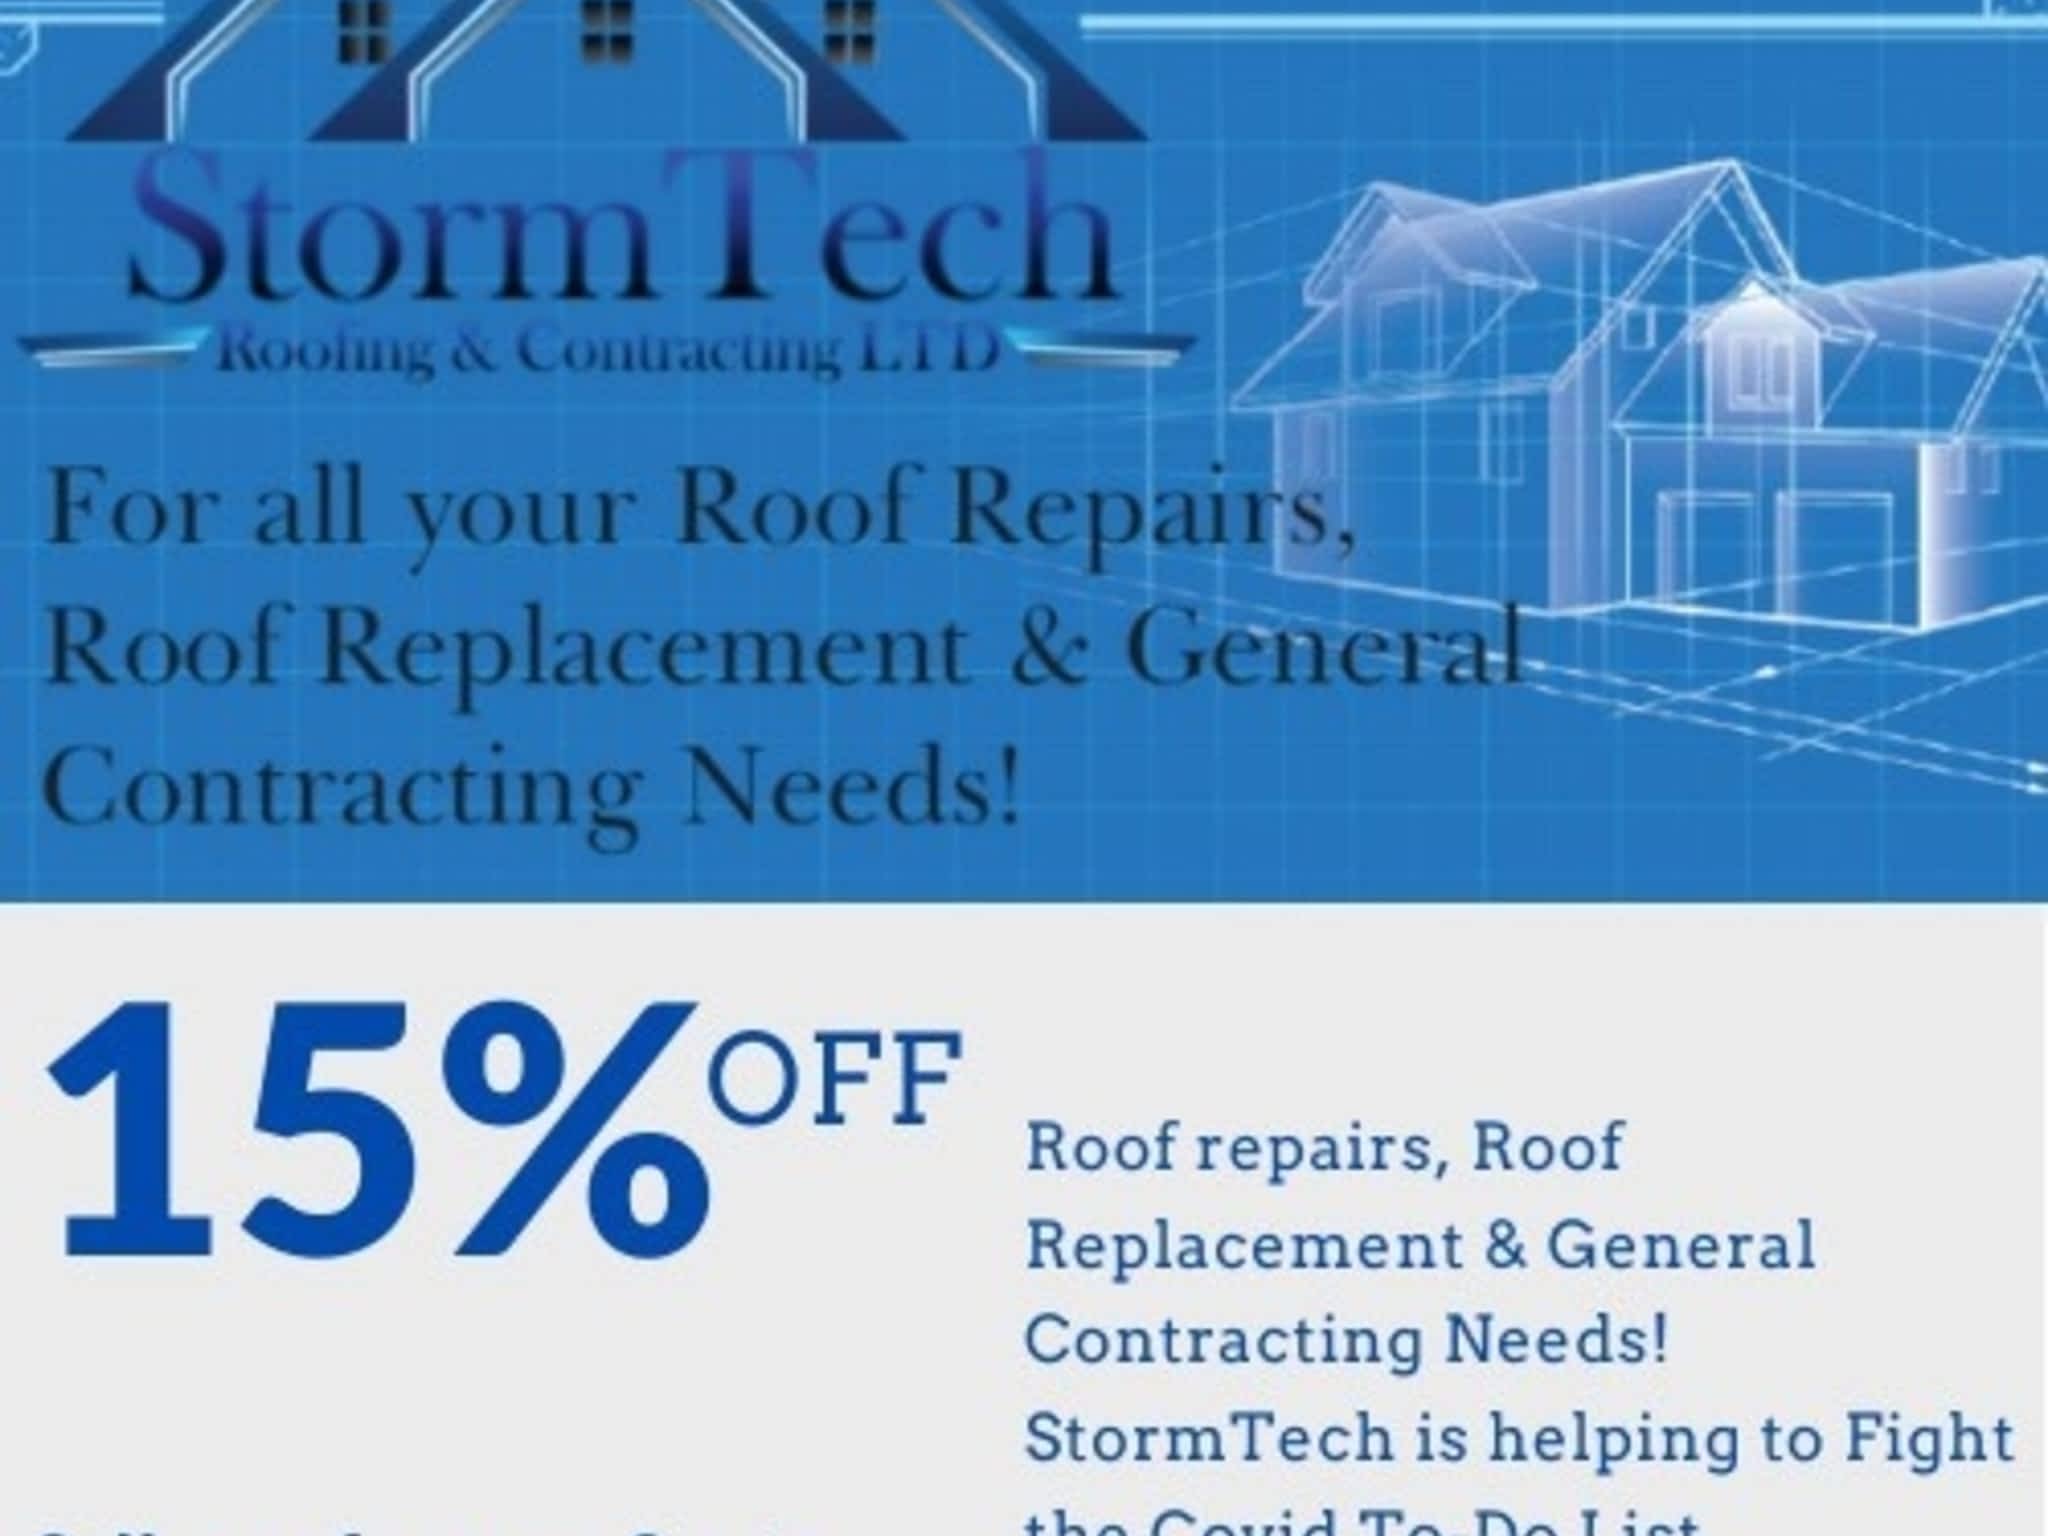 photo StormTech Roofing & Contracting Ltd